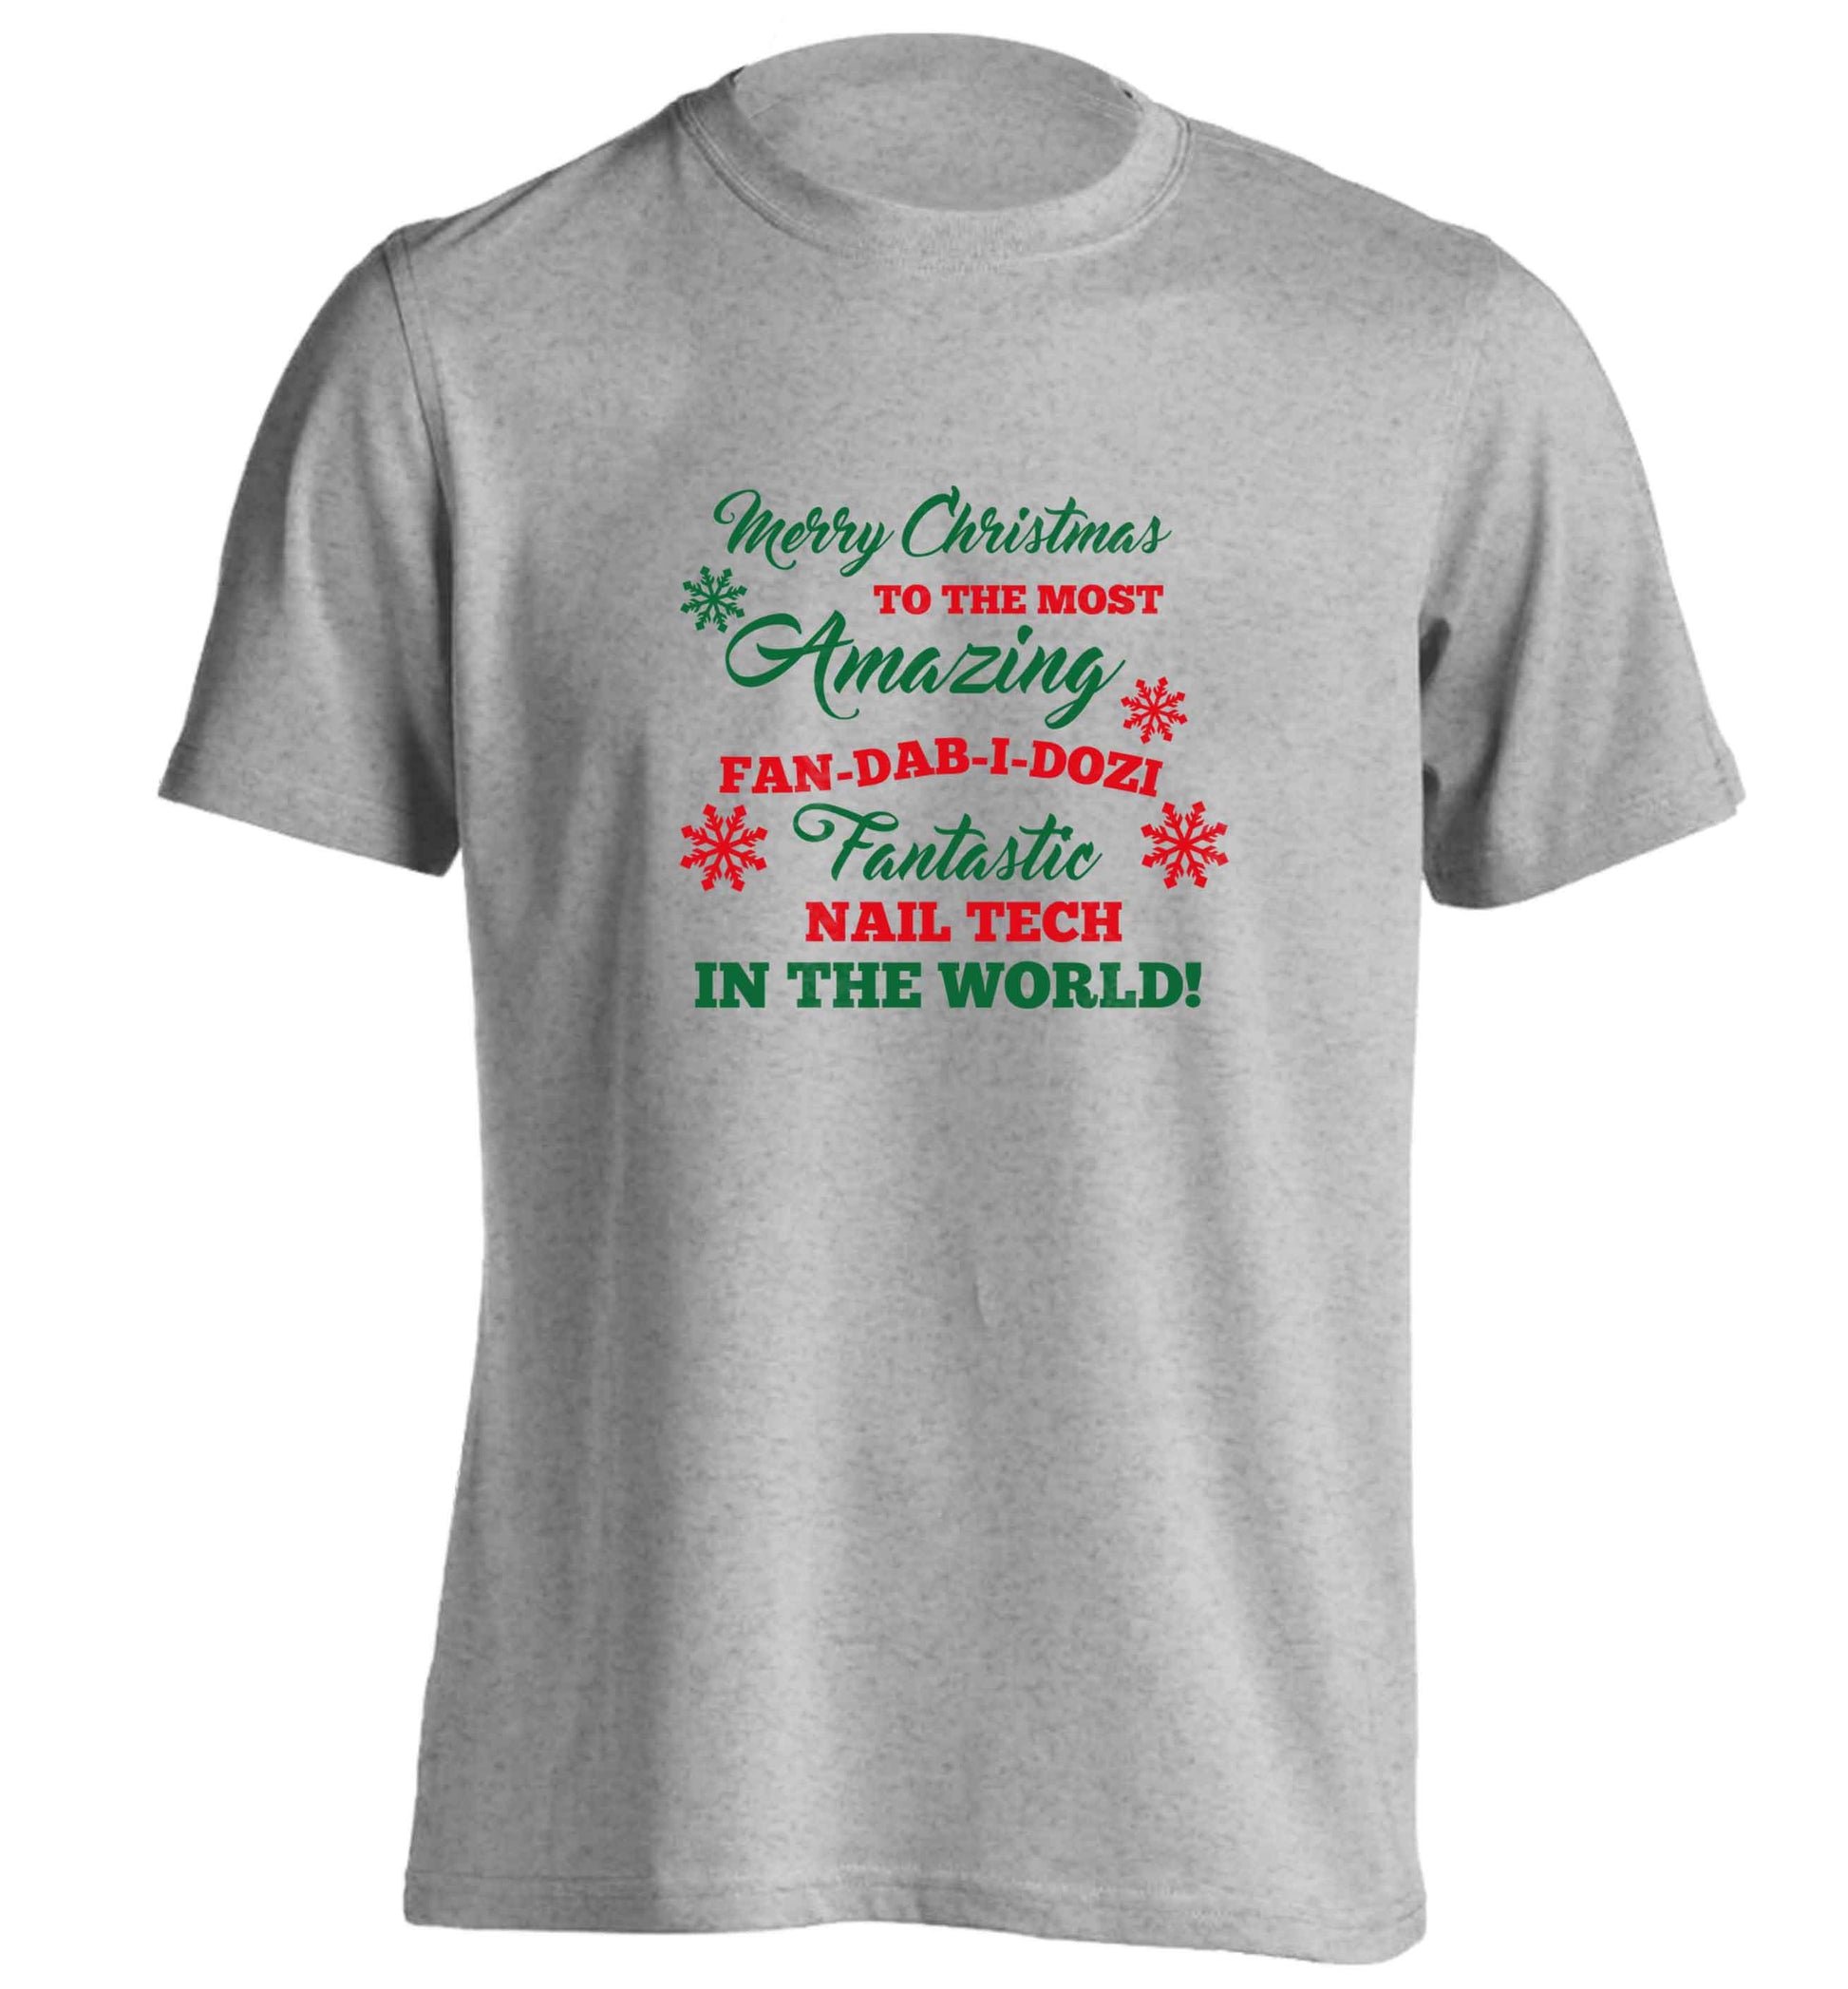 Merry Christmas to the most amazing fan-dab-i-dozi fantasic nail technician in the world adults unisex grey Tshirt 2XL